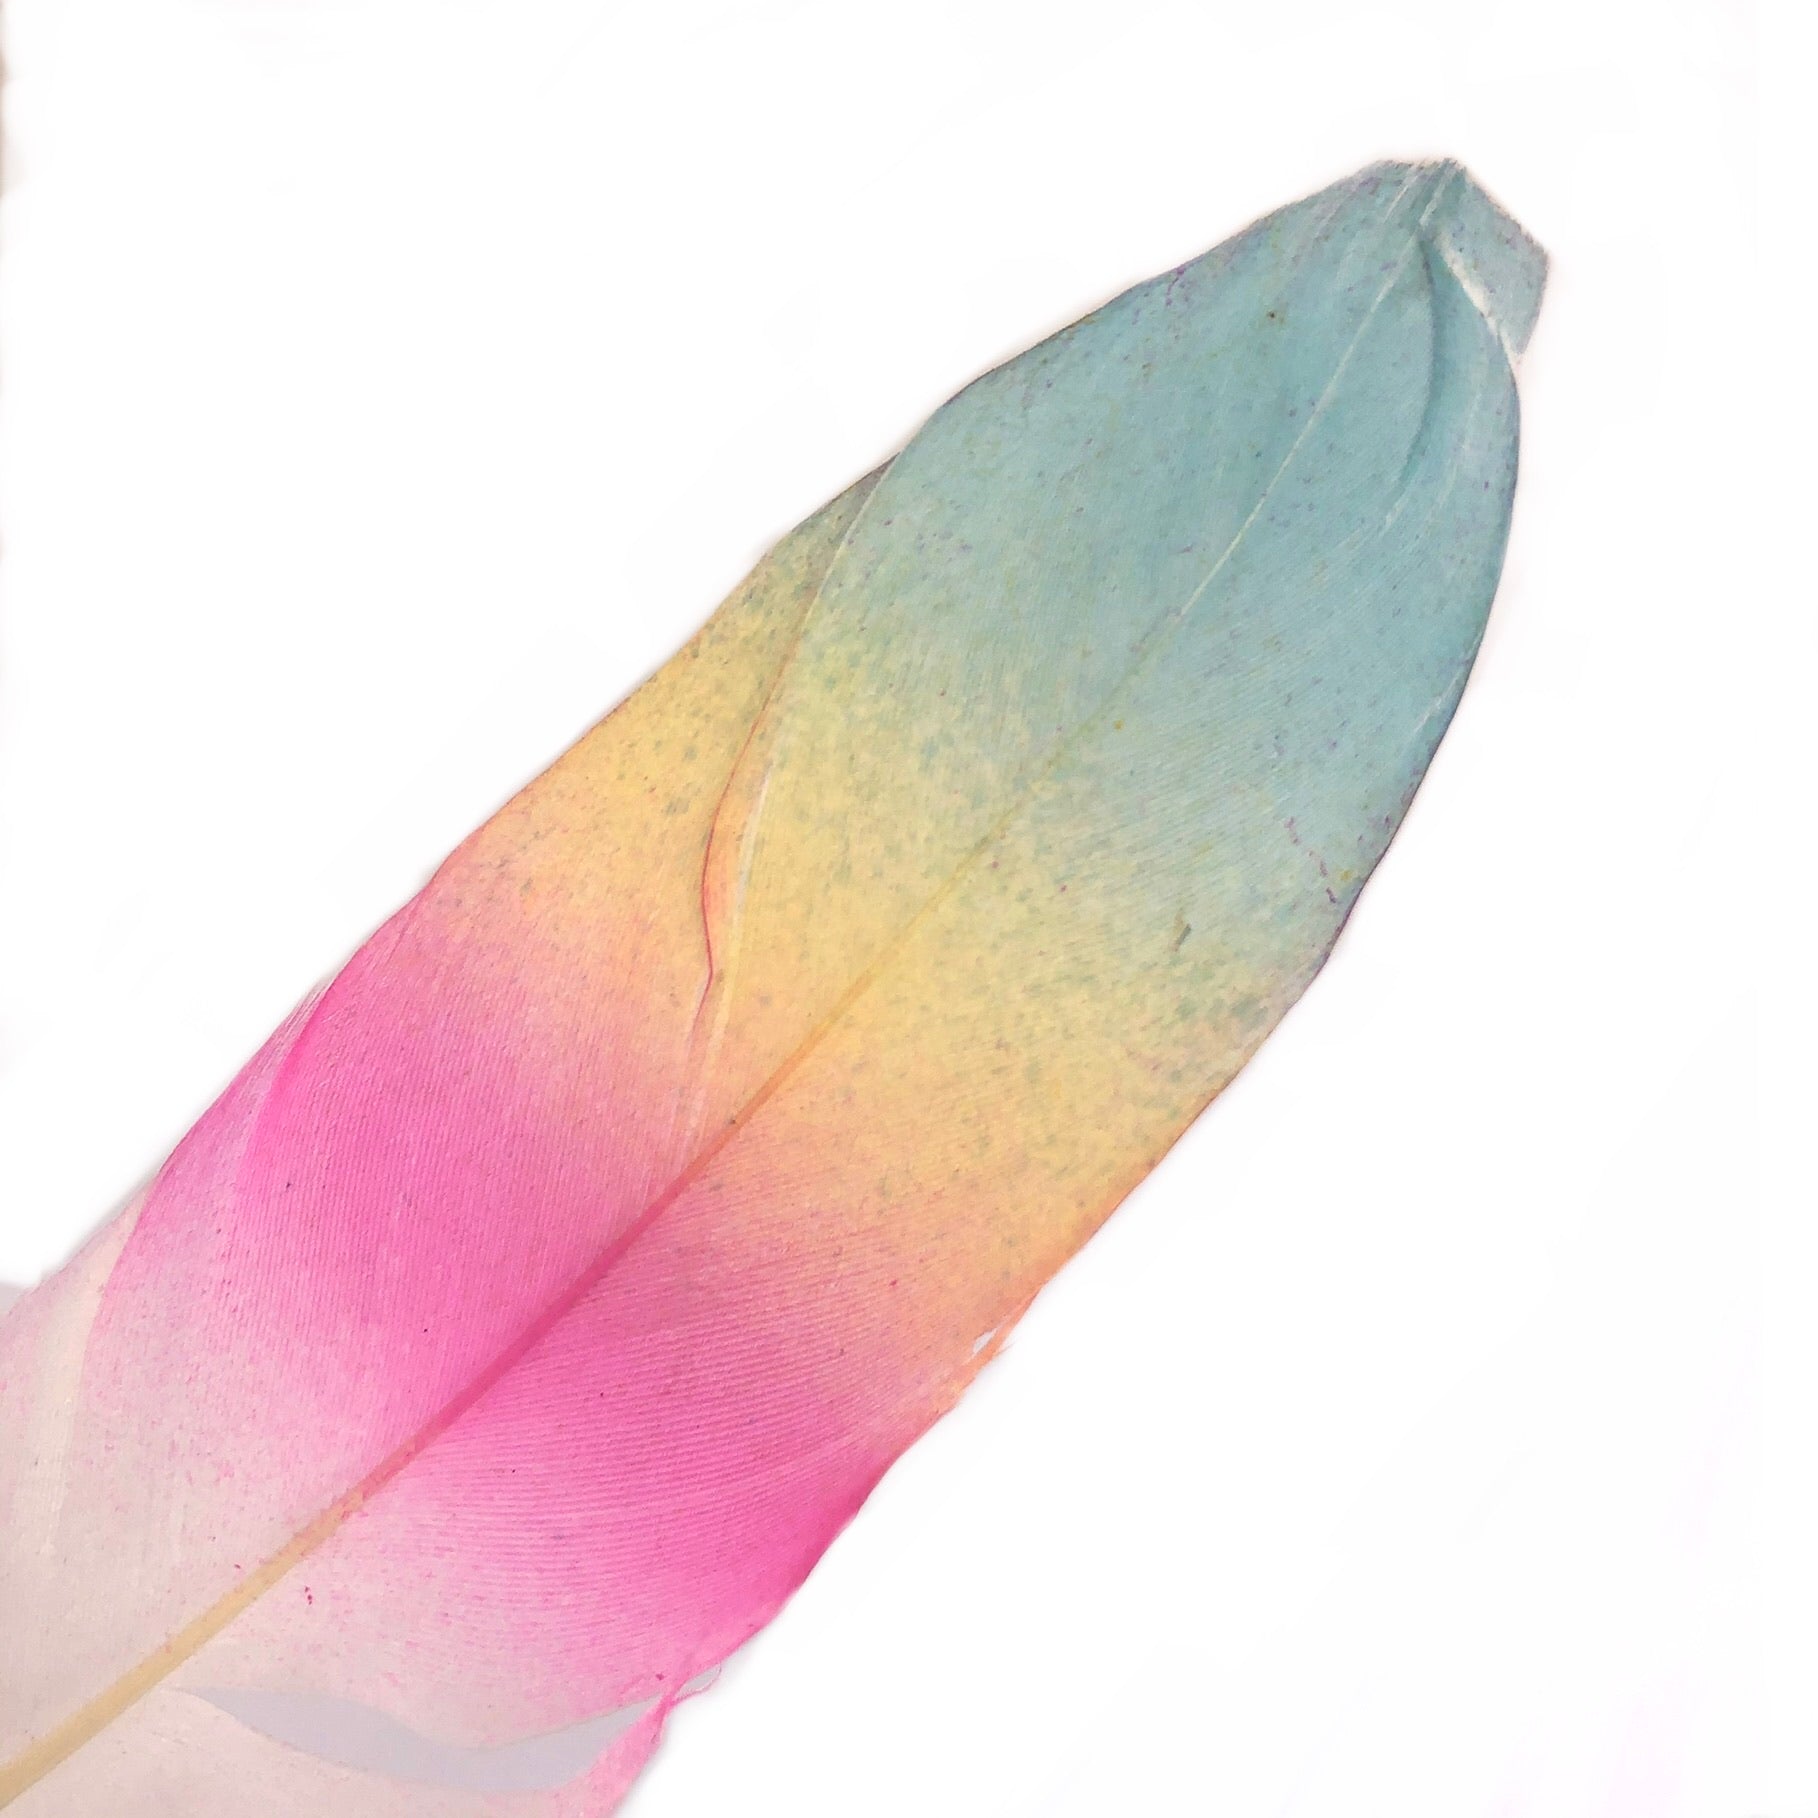 Goose Pointer Printed White Feather Art Craft - Ombre Rainbow Style 13 x 10 pcs